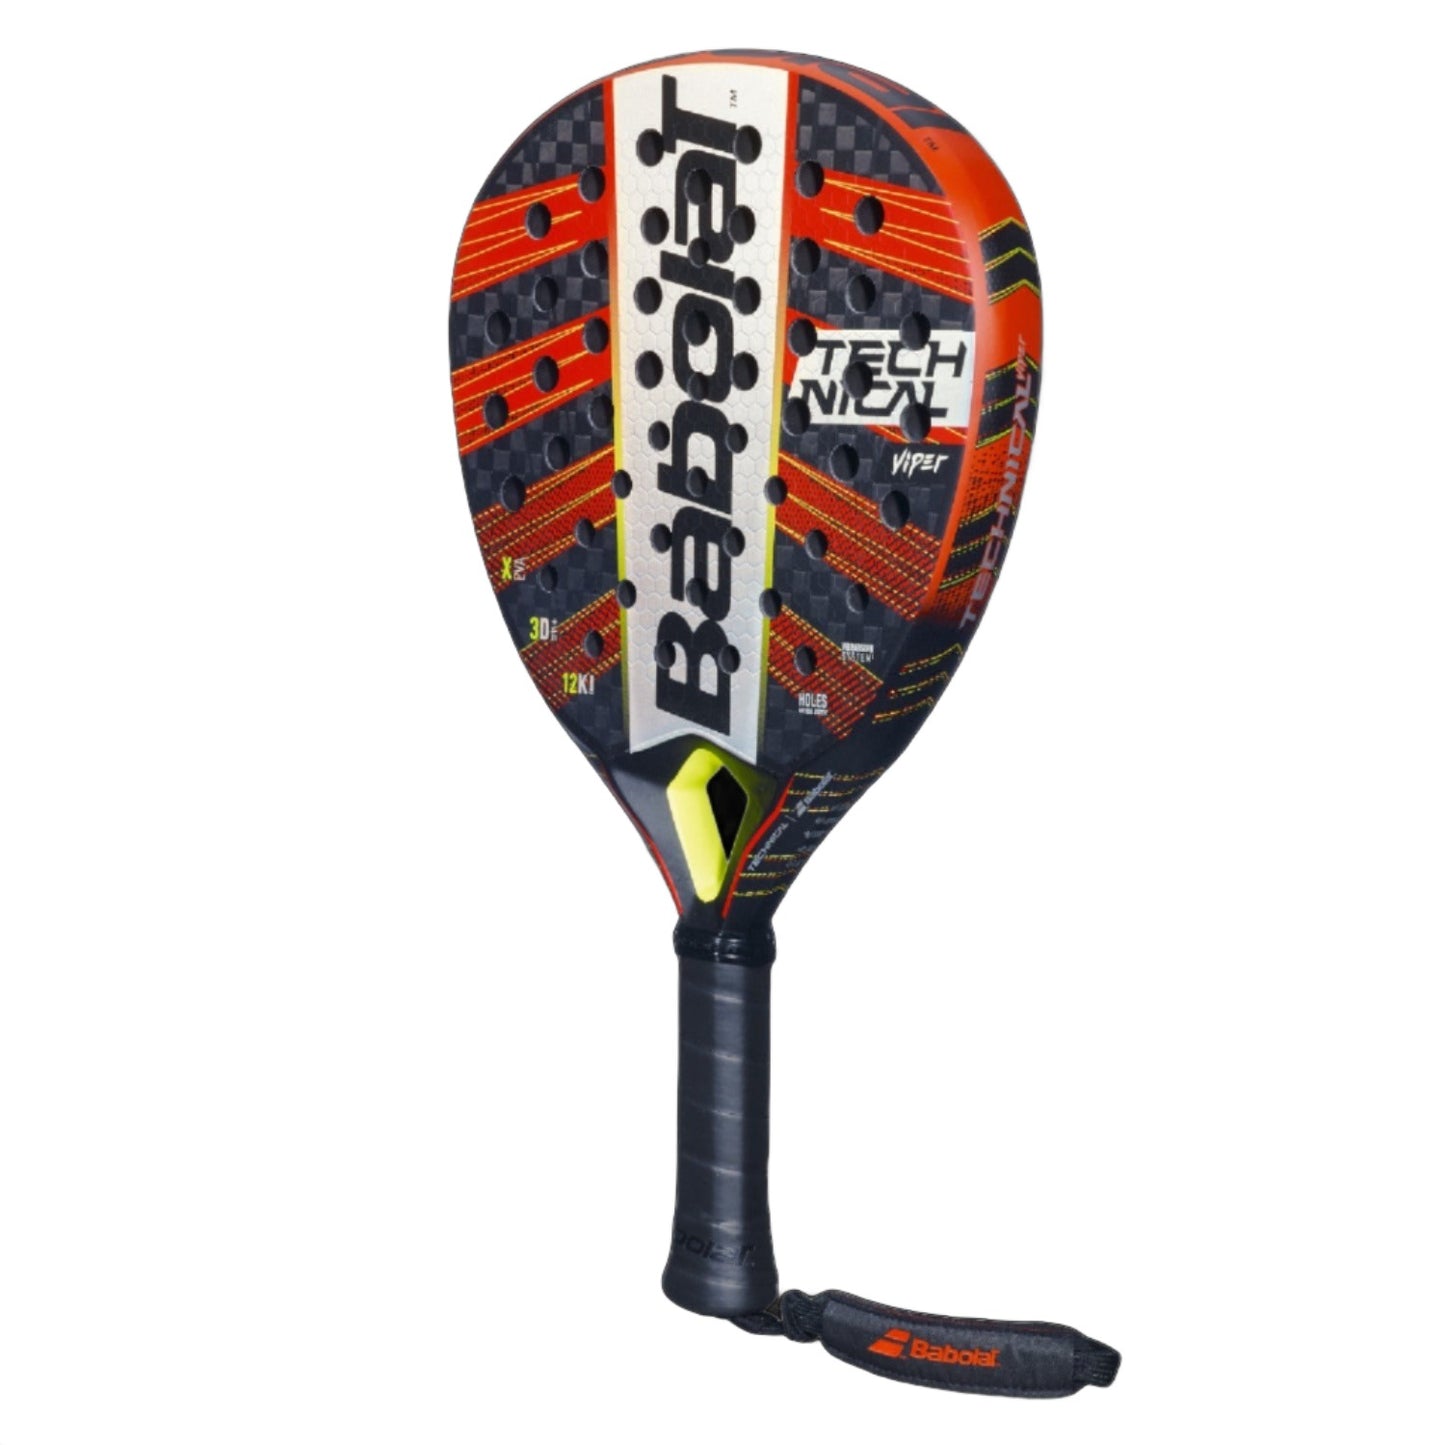 Main image of the Babolat Technical Viper 2023 padel racket on sale at Thepadelshop.co.nz